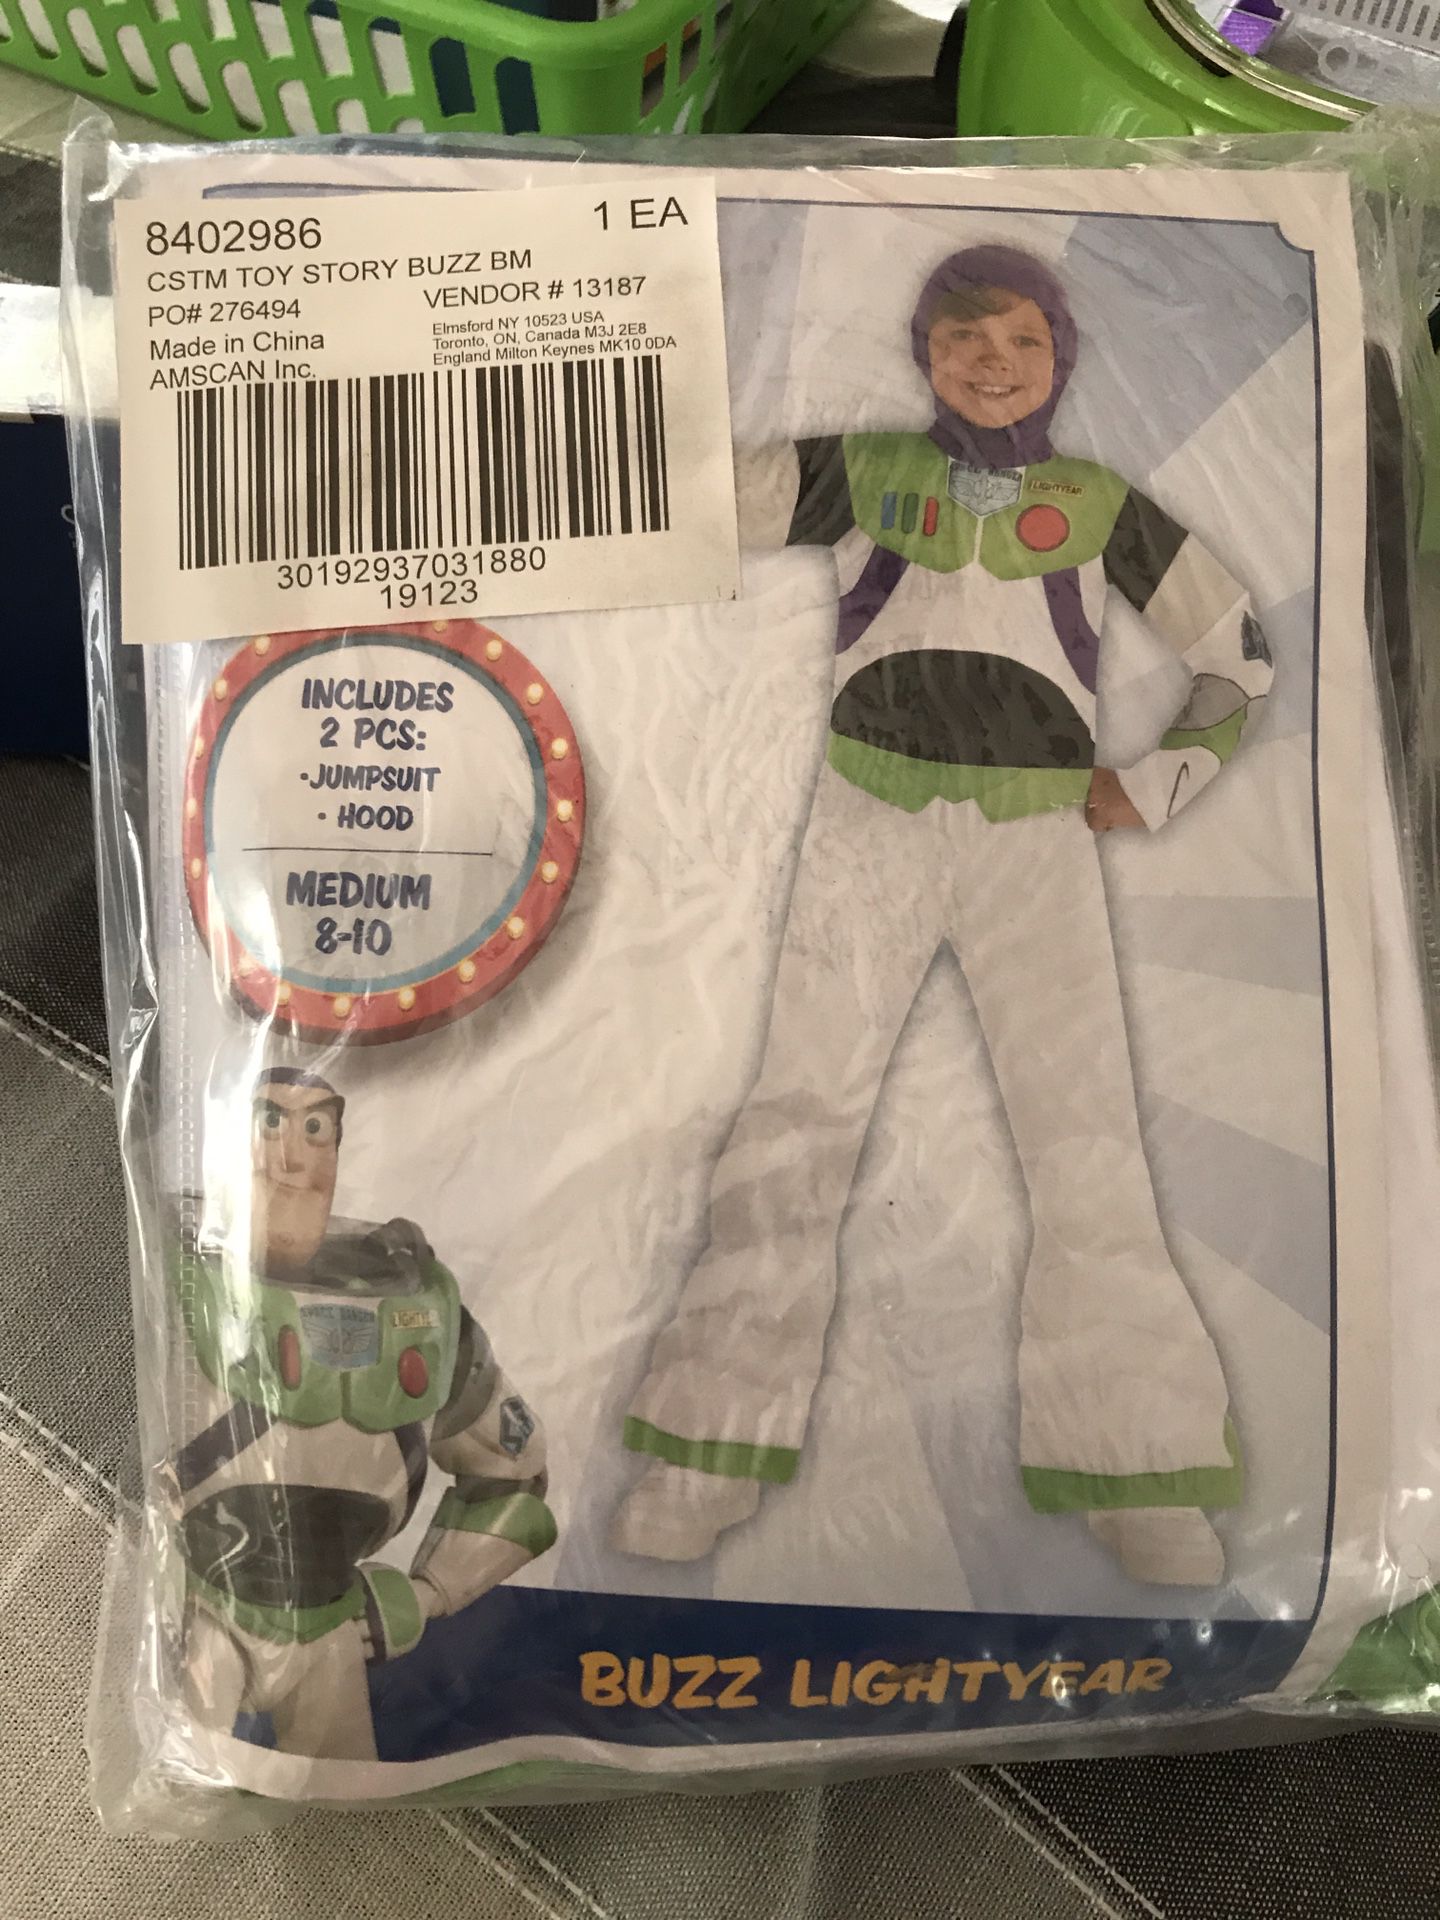 Buzz light year costume and accessories